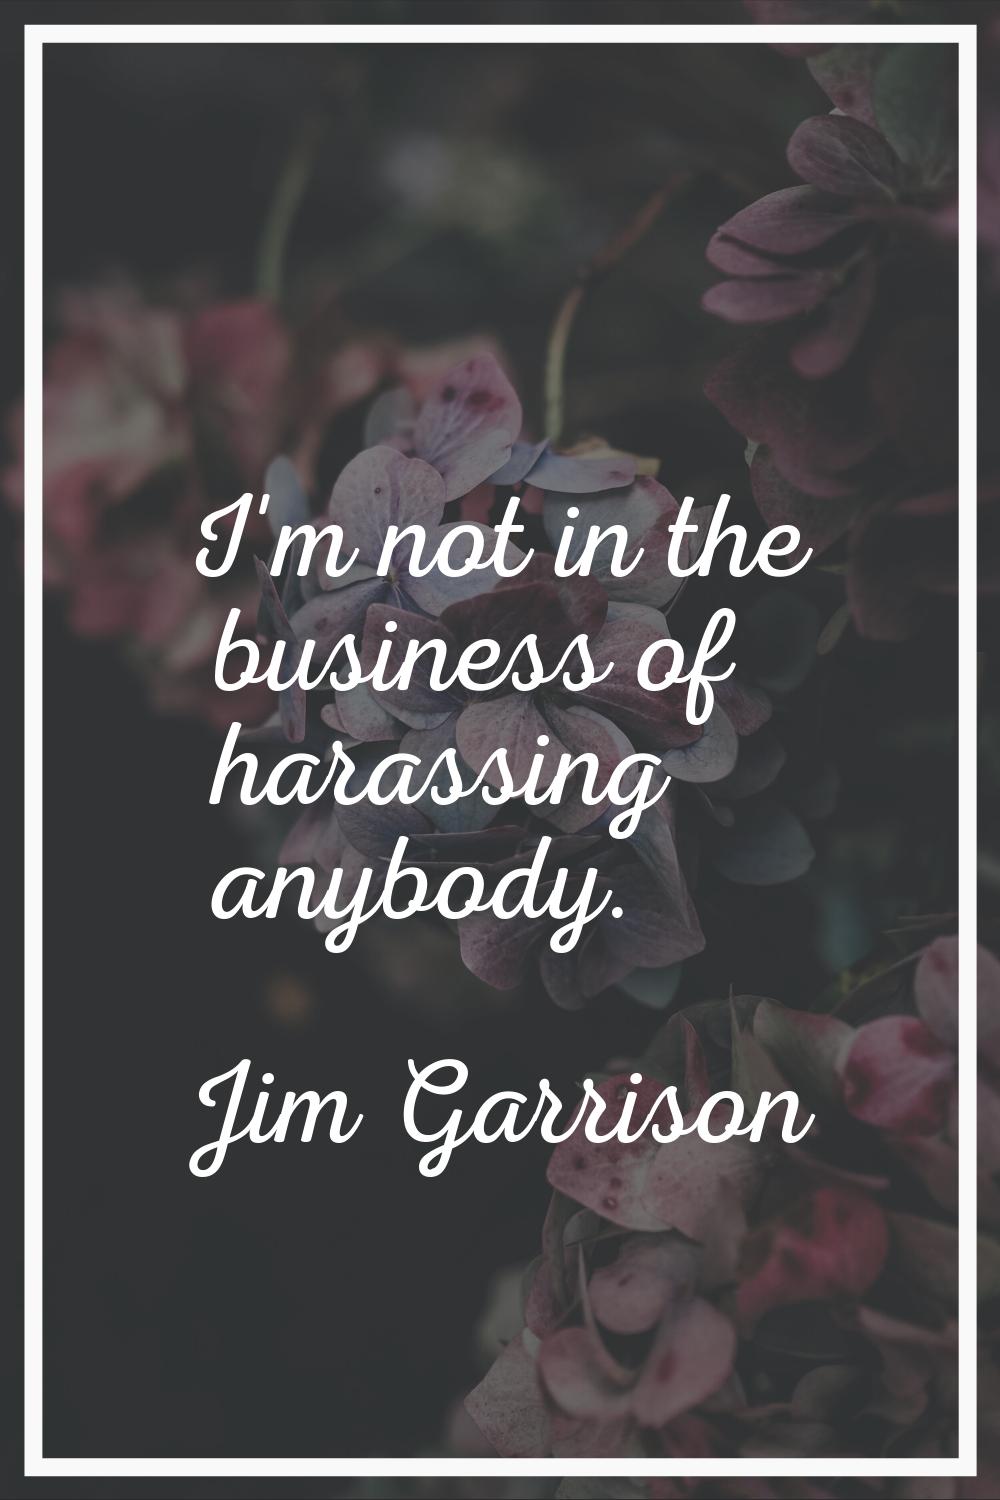 I'm not in the business of harassing anybody.